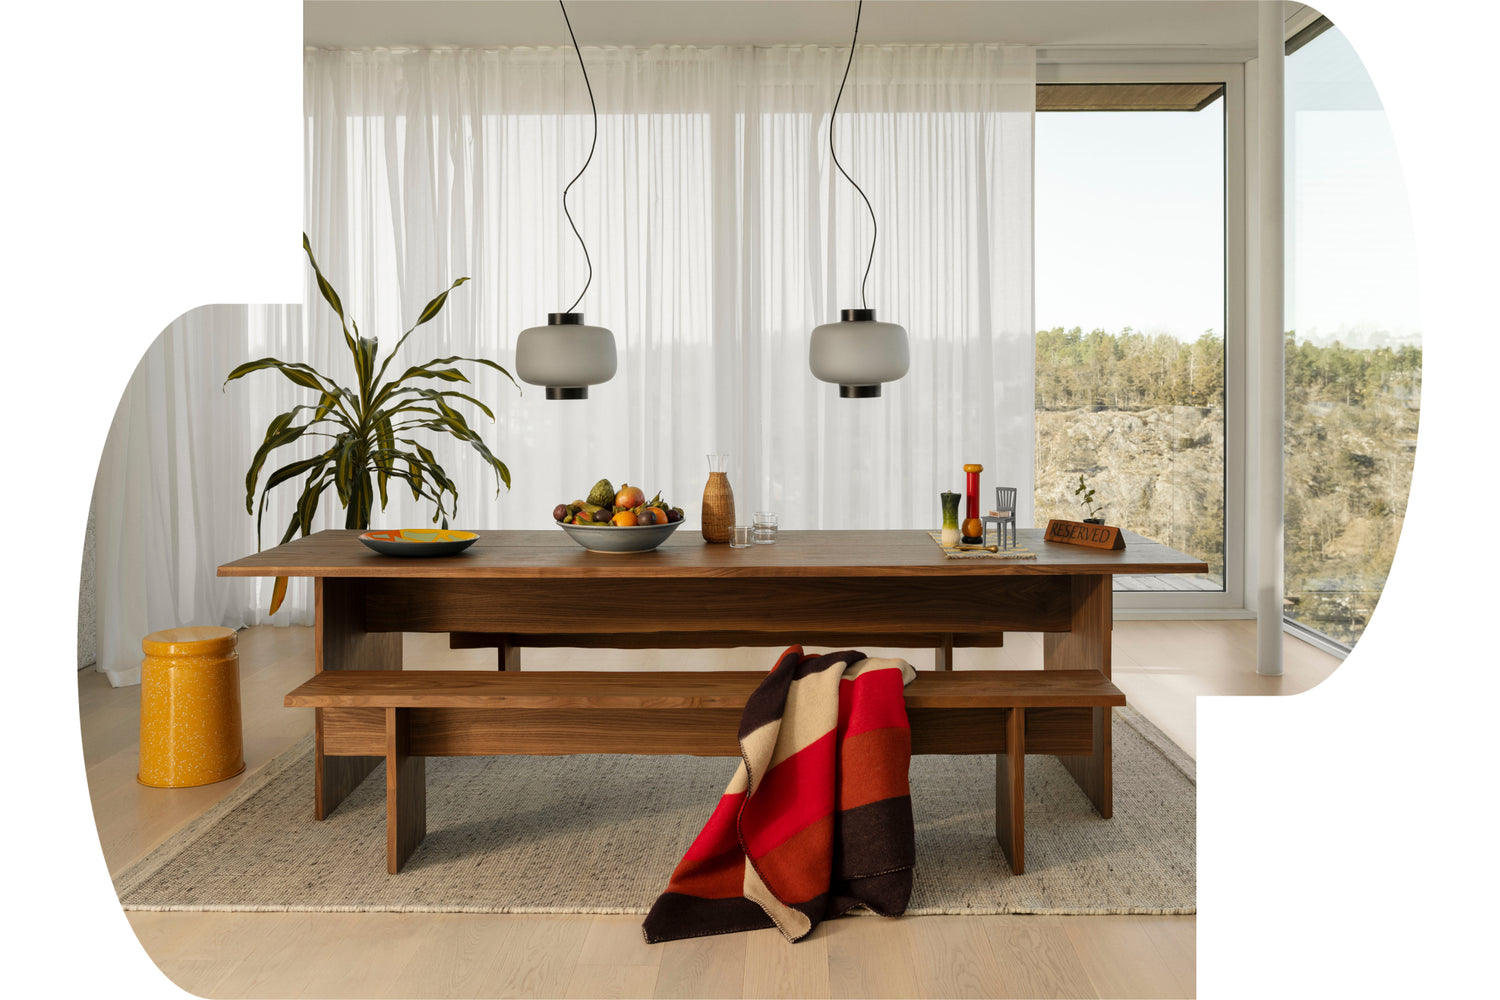 A Hem dining room scene featuring the Bookmatch Table + Bench Set in Walnut, Dusk Lamps, Dune Rug and Last Stool.